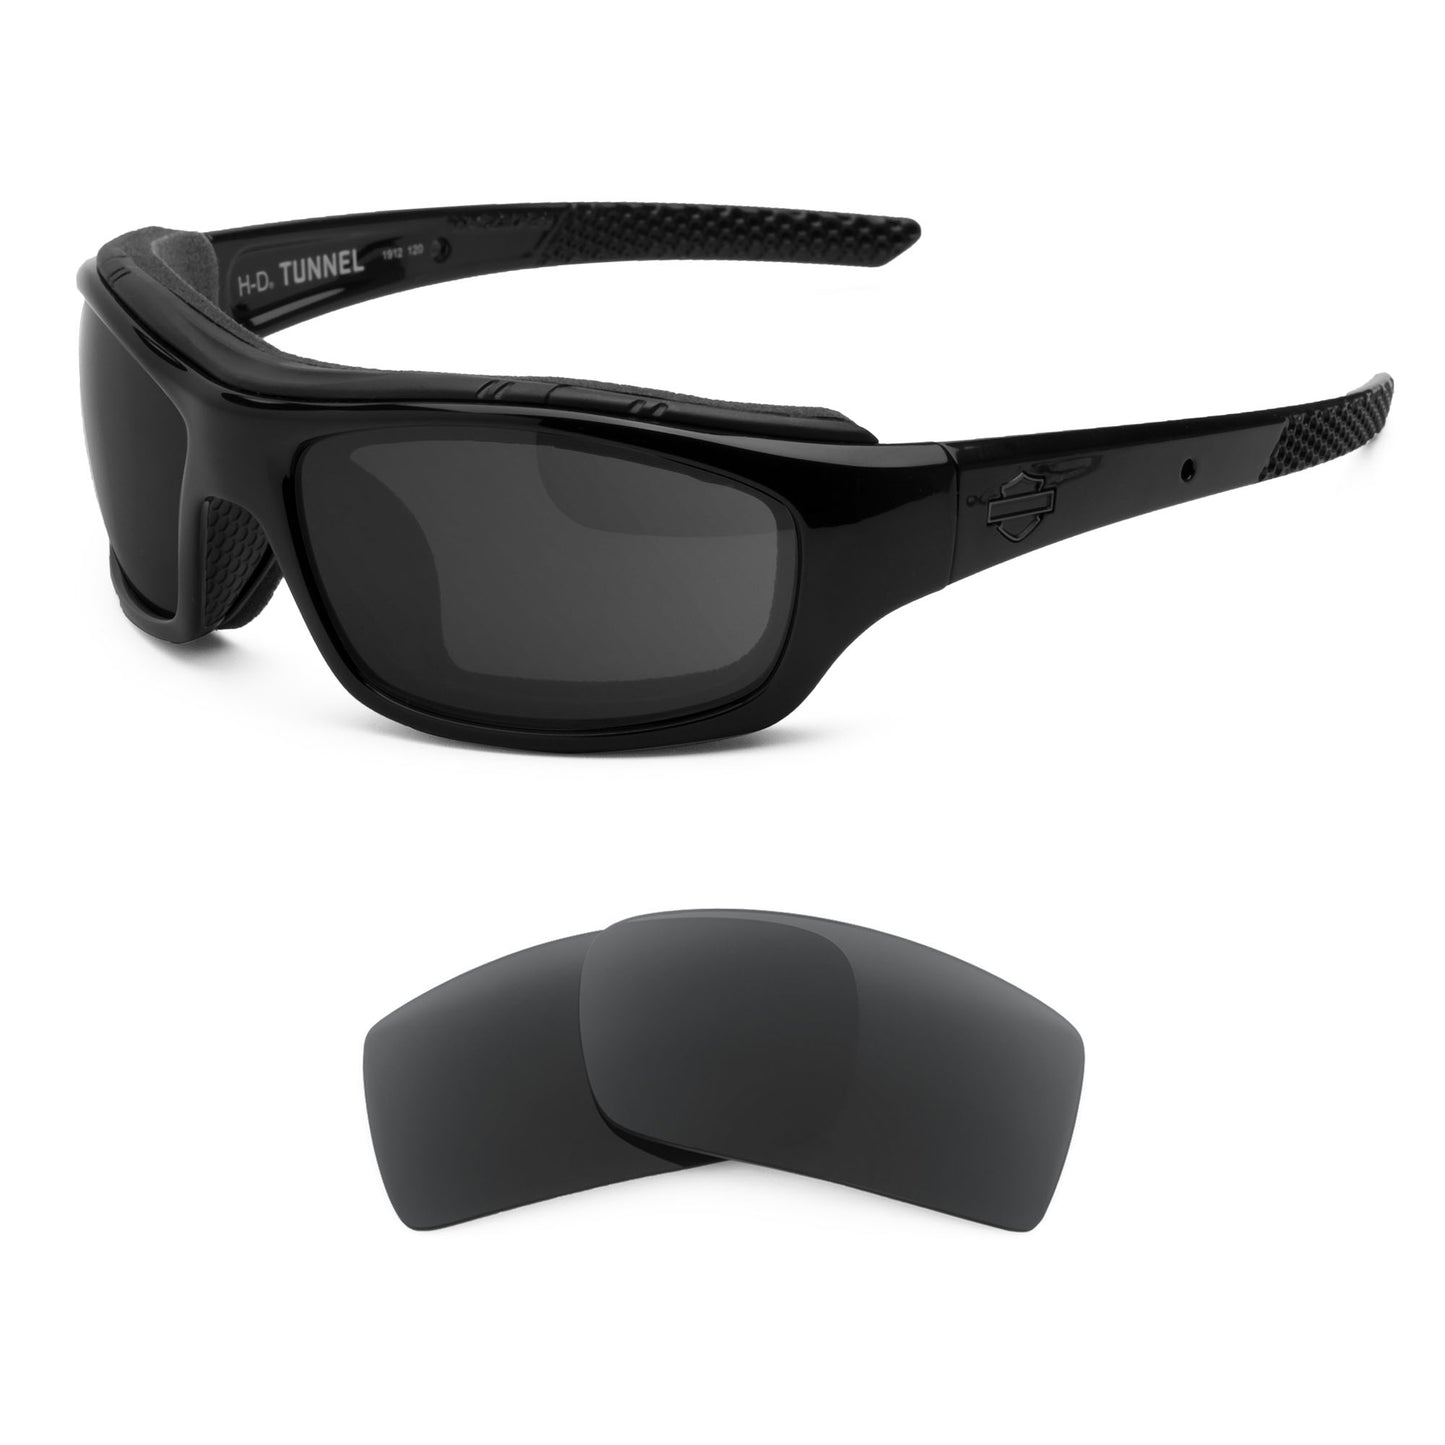 Harley Davidson Tunnel sunglasses with replacement lenses